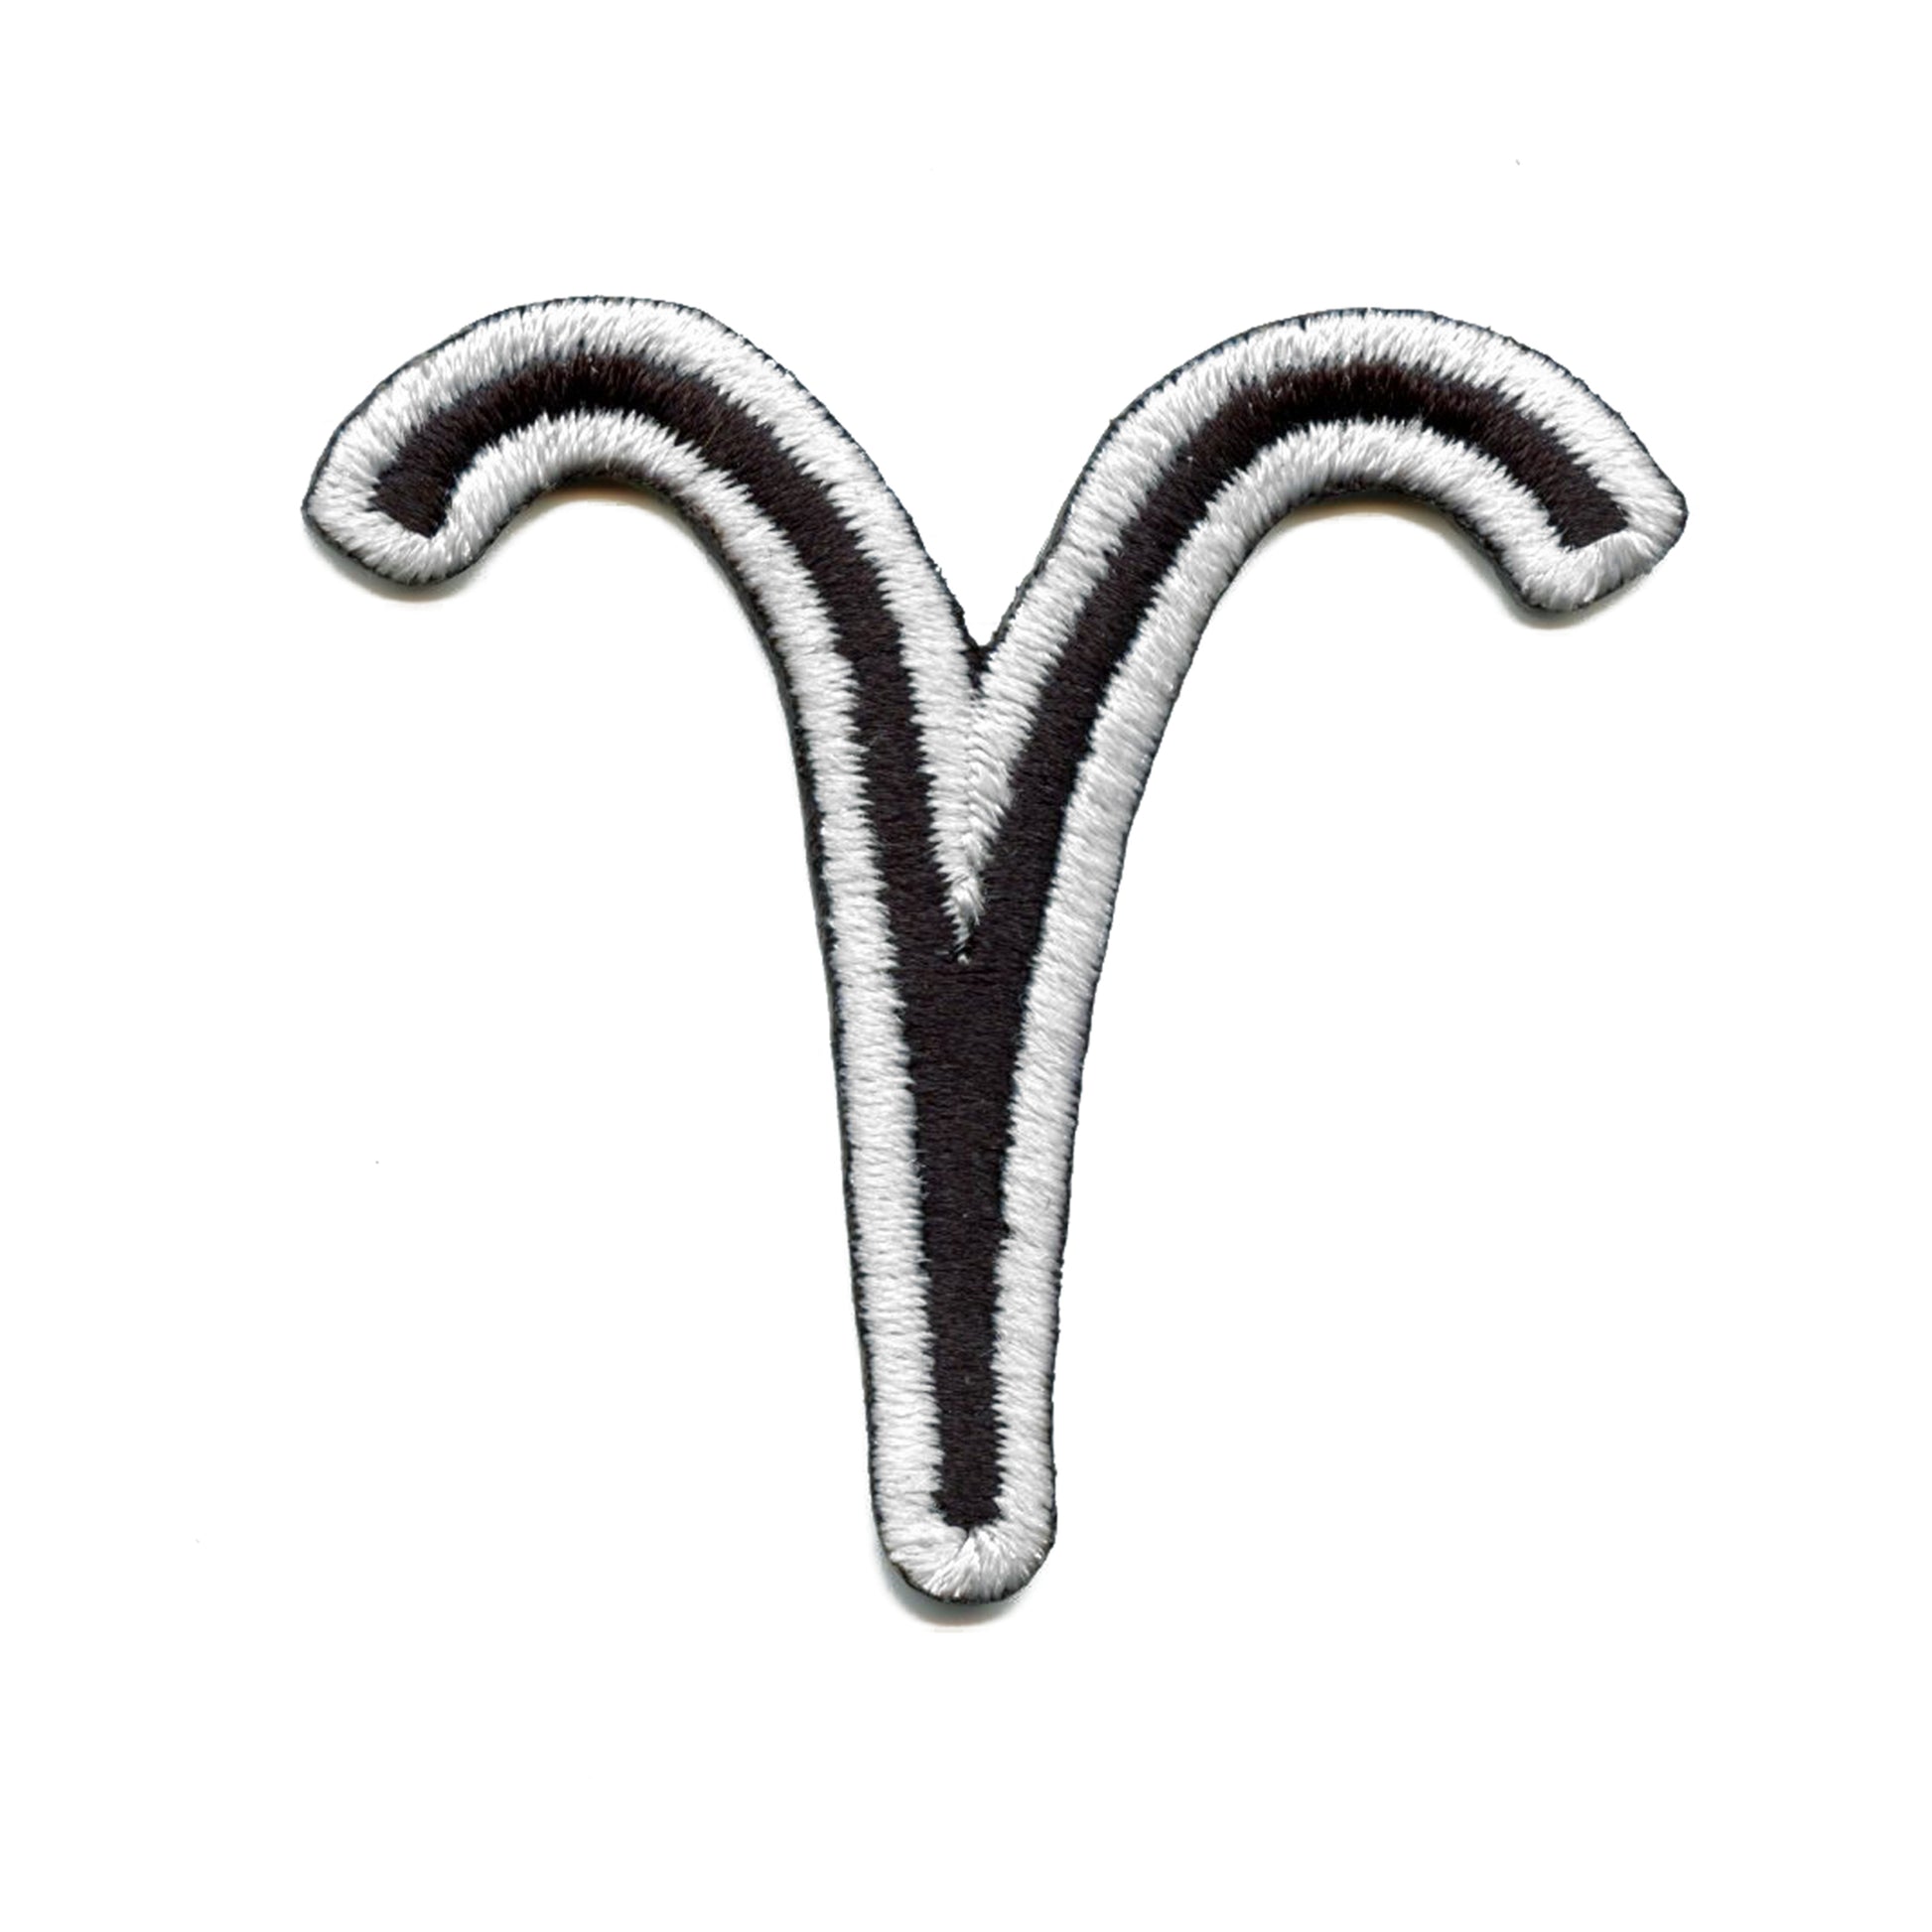 Aries Astrological Zodiac Symbol Patch Horoscope Ram Sign Embroidered Iron On 